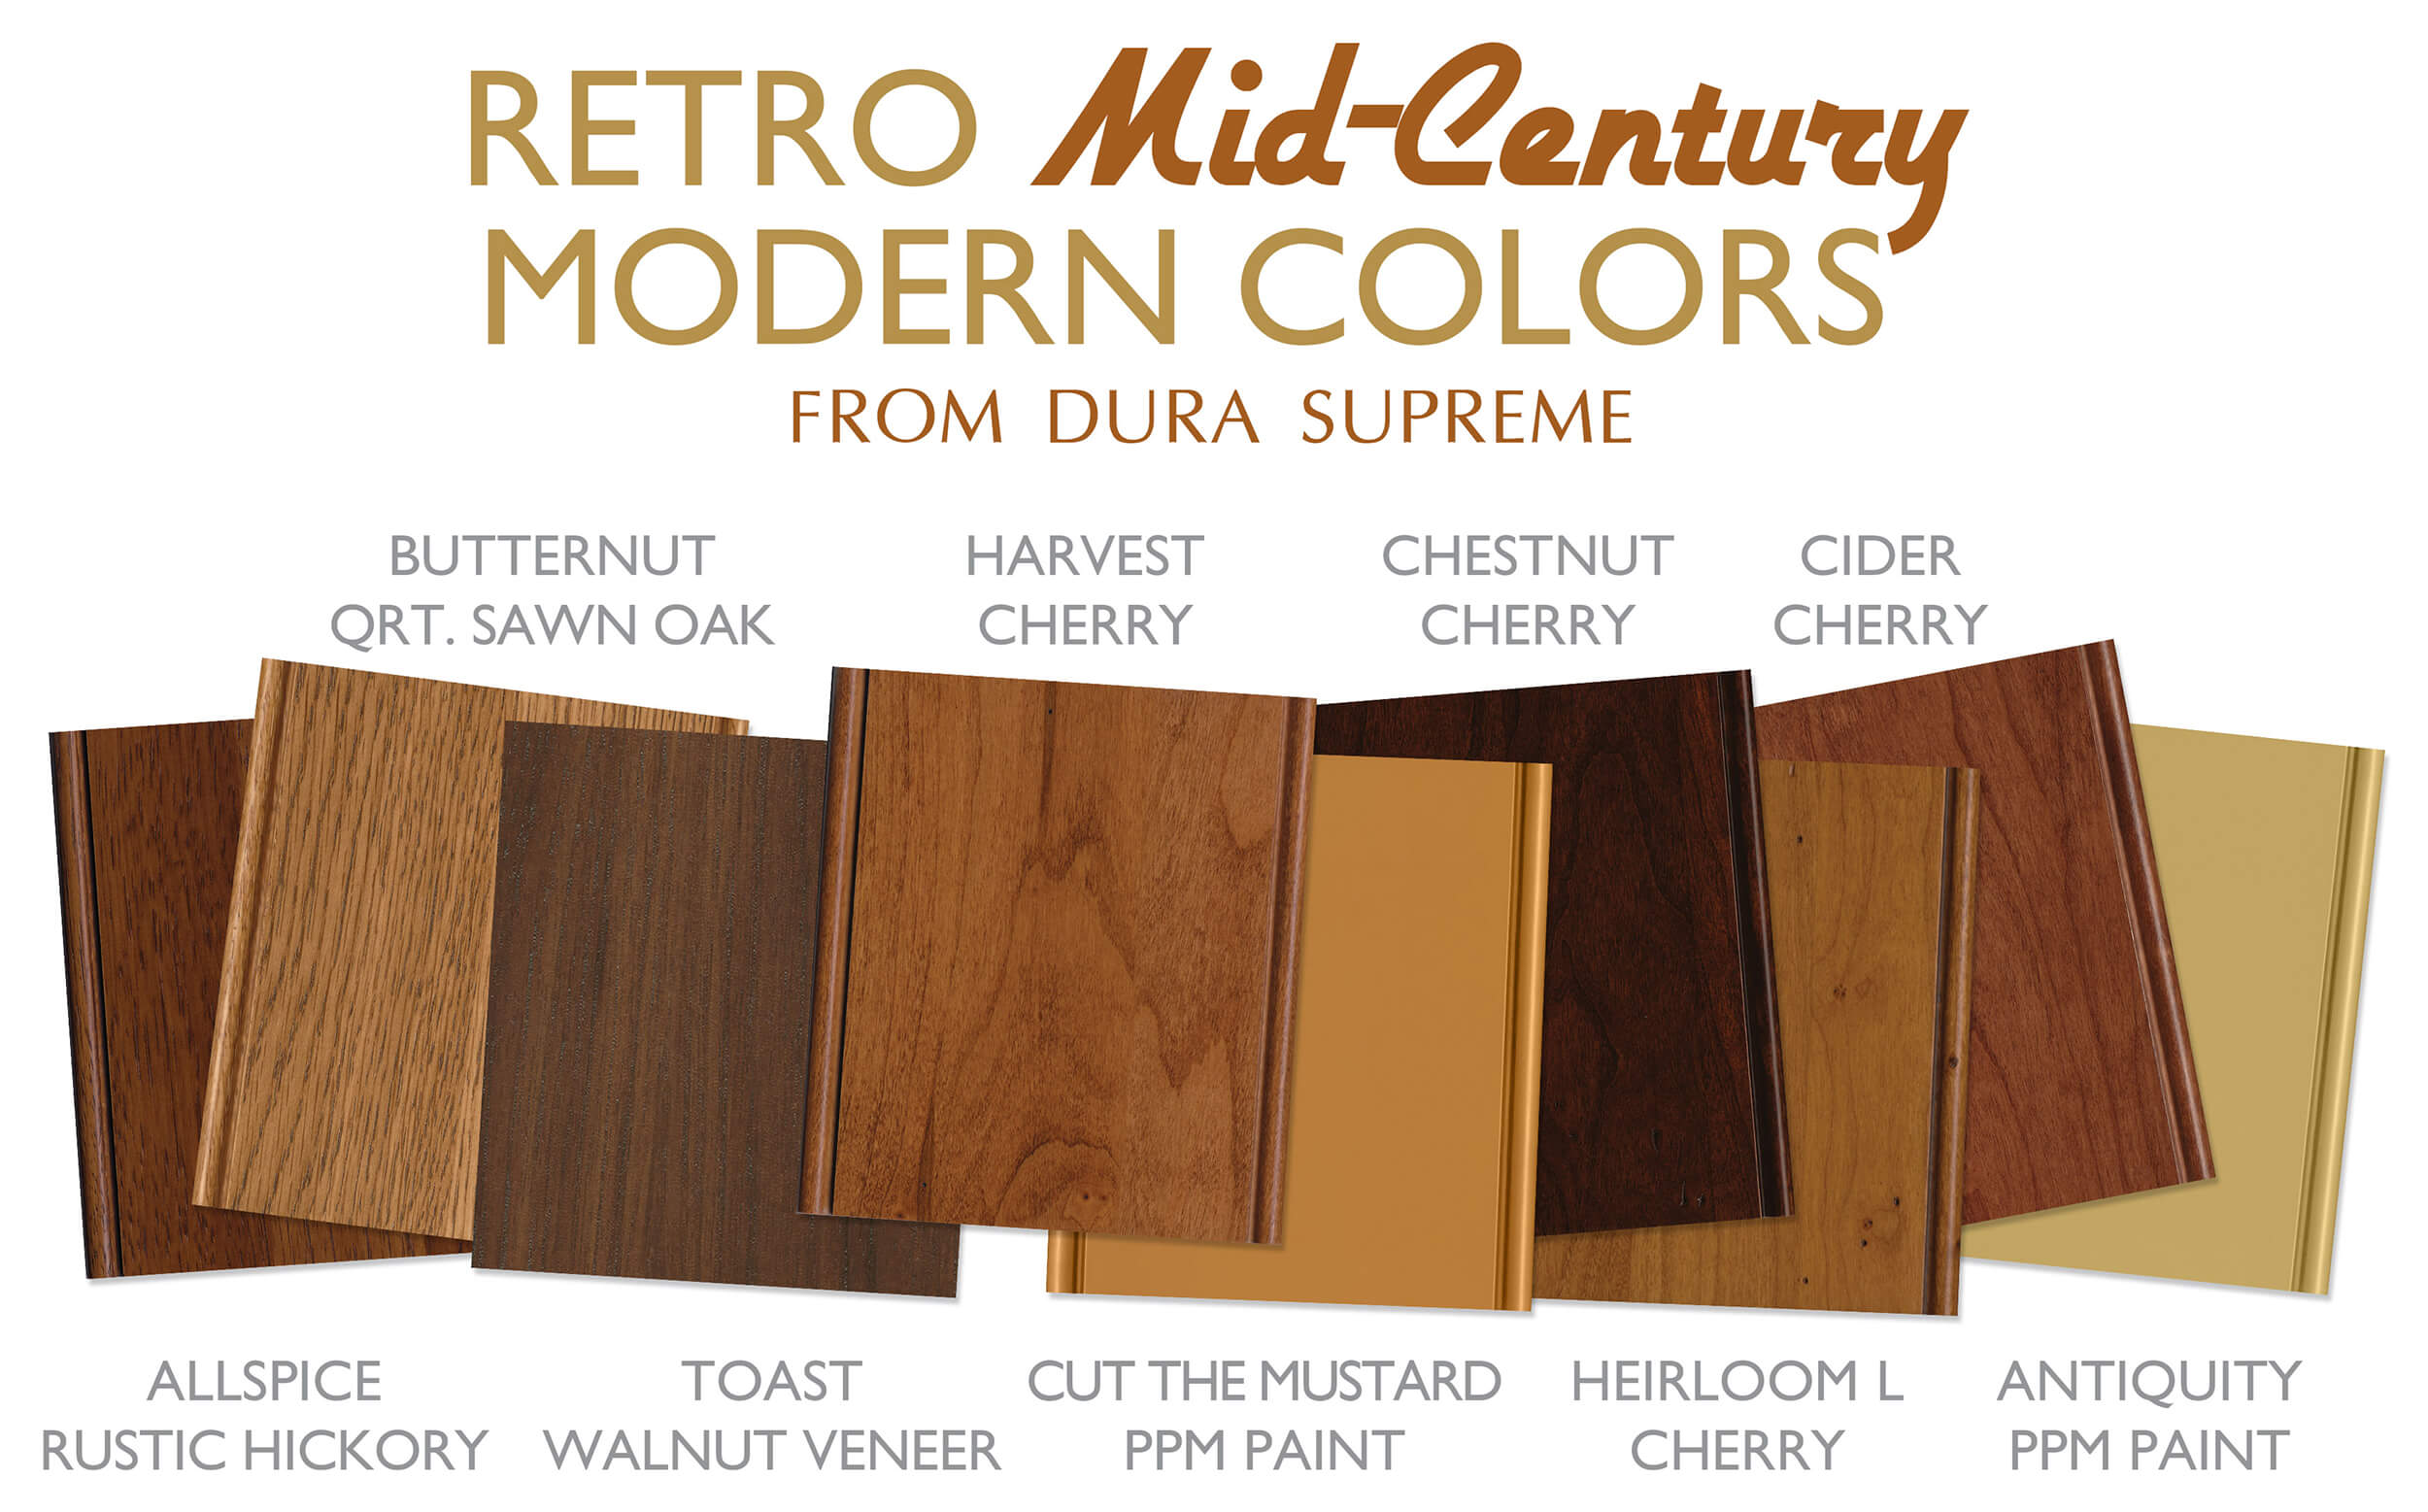 Retro Mid-Century Modern Style Kitchen Cabinet Colors from Dura Supreme for a 20th century look.